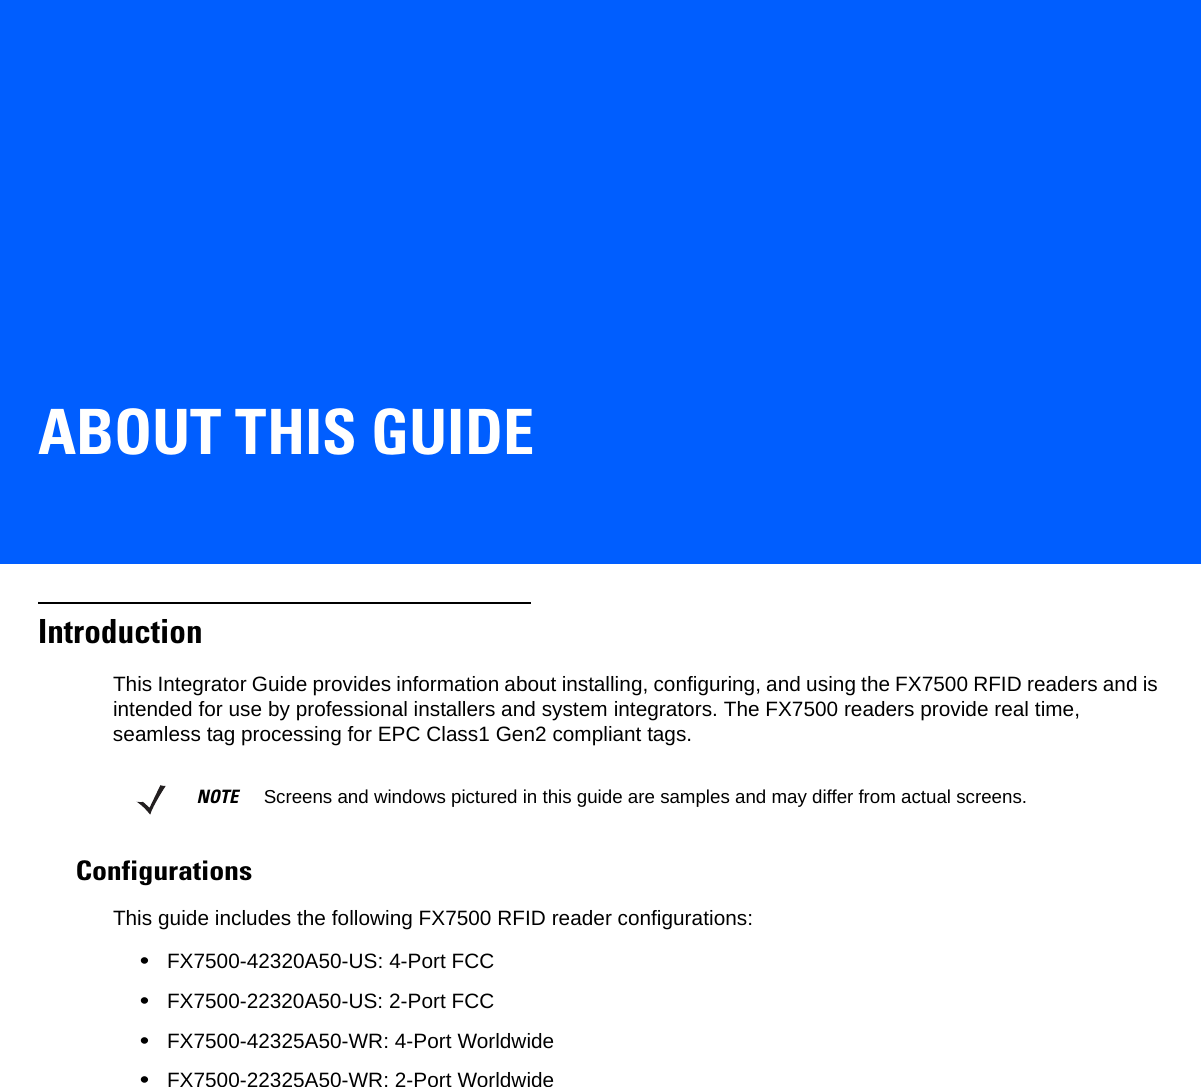 ABOUT THIS GUIDEIntroductionThis Integrator Guide provides information about installing, configuring, and using the FX7500 RFID readers and is intended for use by professional installers and system integrators. The FX7500 readers provide real time, seamless tag processing for EPC Class1 Gen2 compliant tags.ConfigurationsThis guide includes the following FX7500 RFID reader configurations: •FX7500-42320A50-US: 4-Port FCC•FX7500-22320A50-US: 2-Port FCC   •FX7500-42325A50-WR: 4-Port Worldwide•FX7500-22325A50-WR: 2-Port WorldwideNOTE     Screens and windows pictured in this guide are samples and may differ from actual screens.